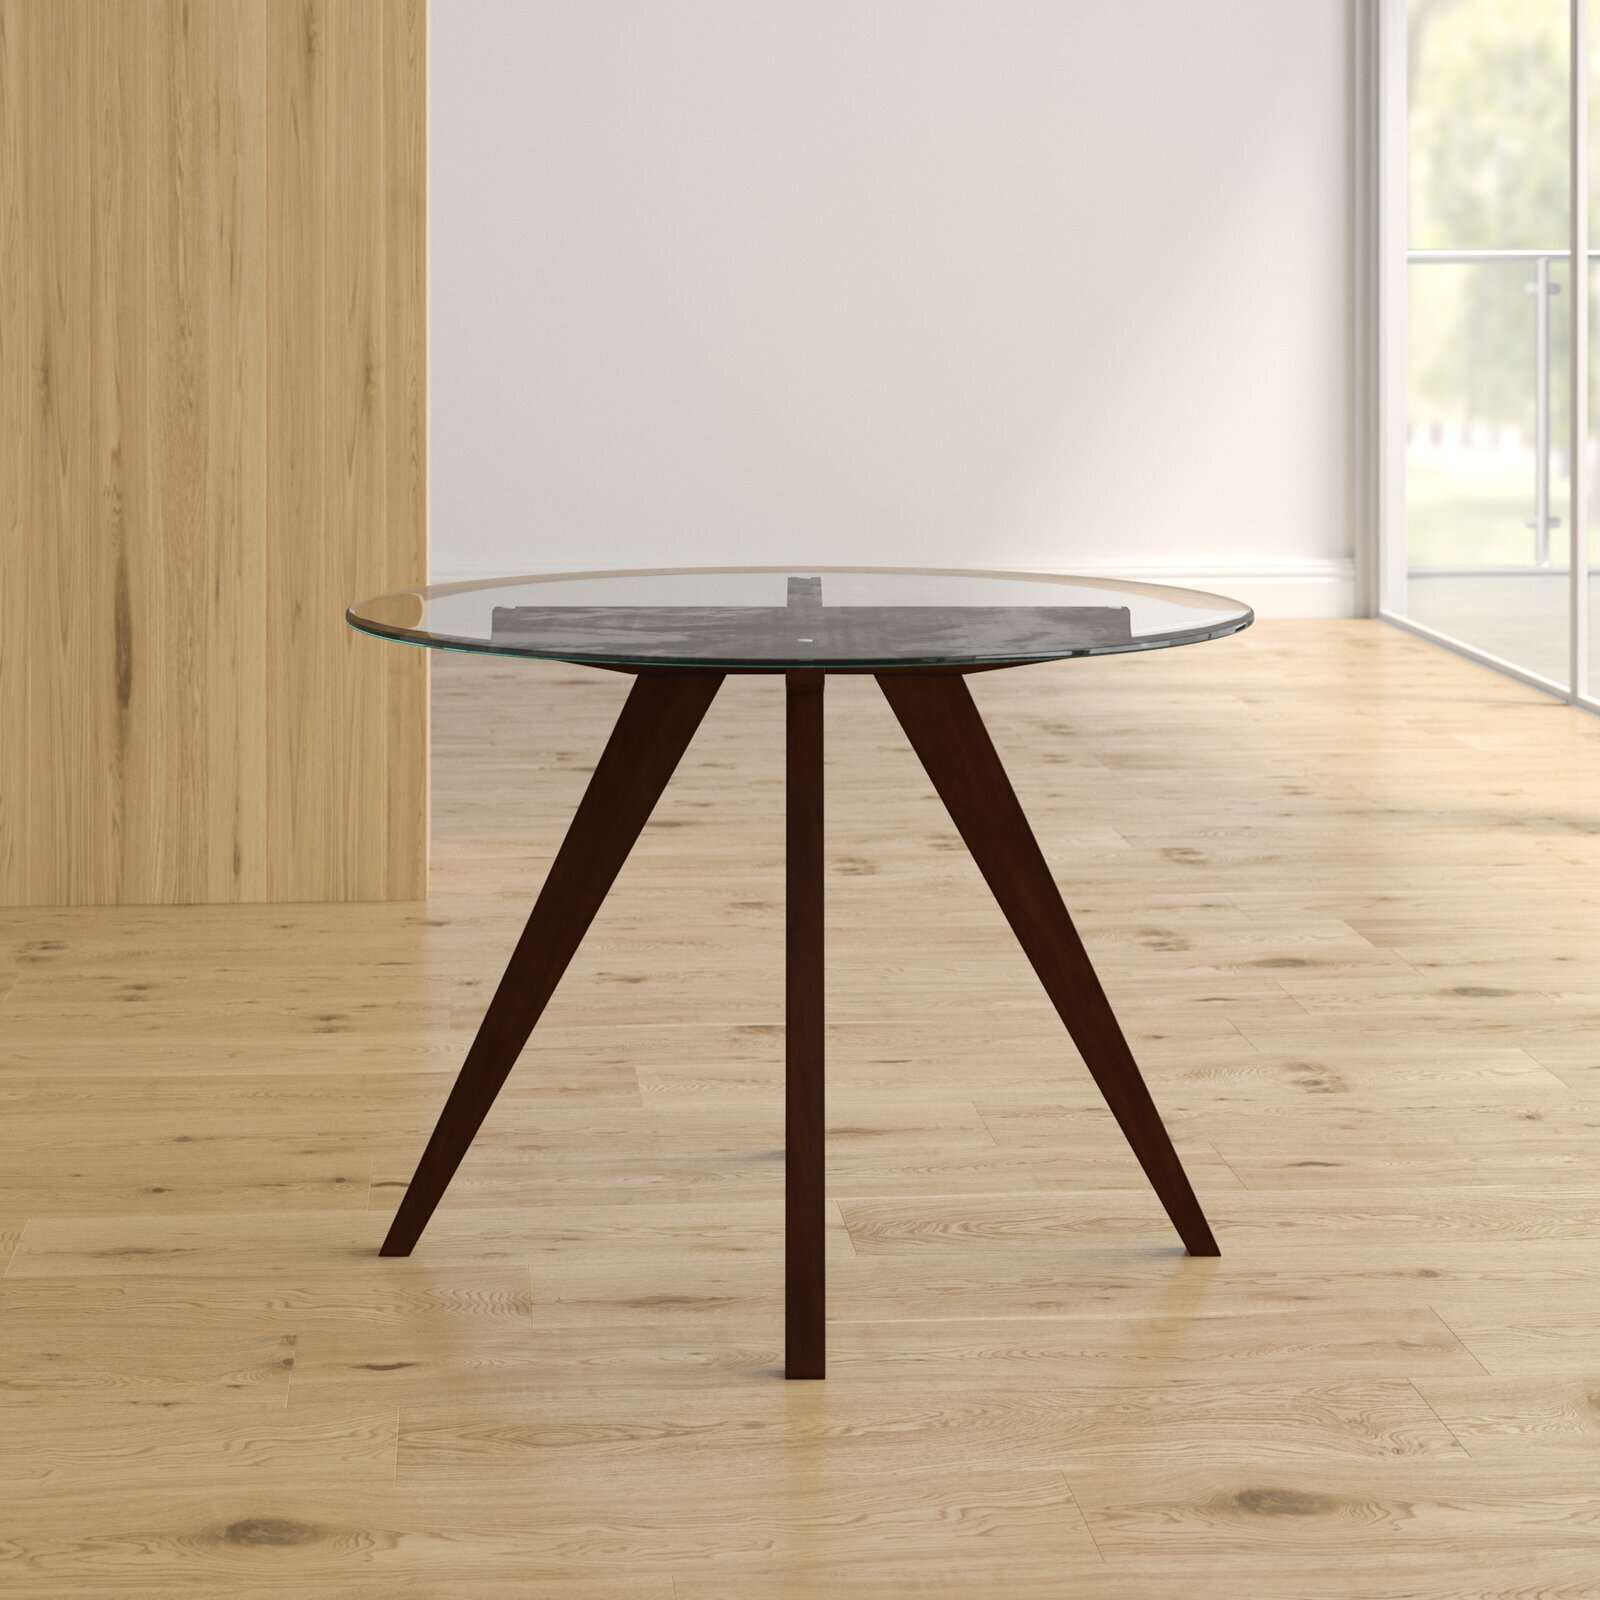 Minimalist dining table base for glass top